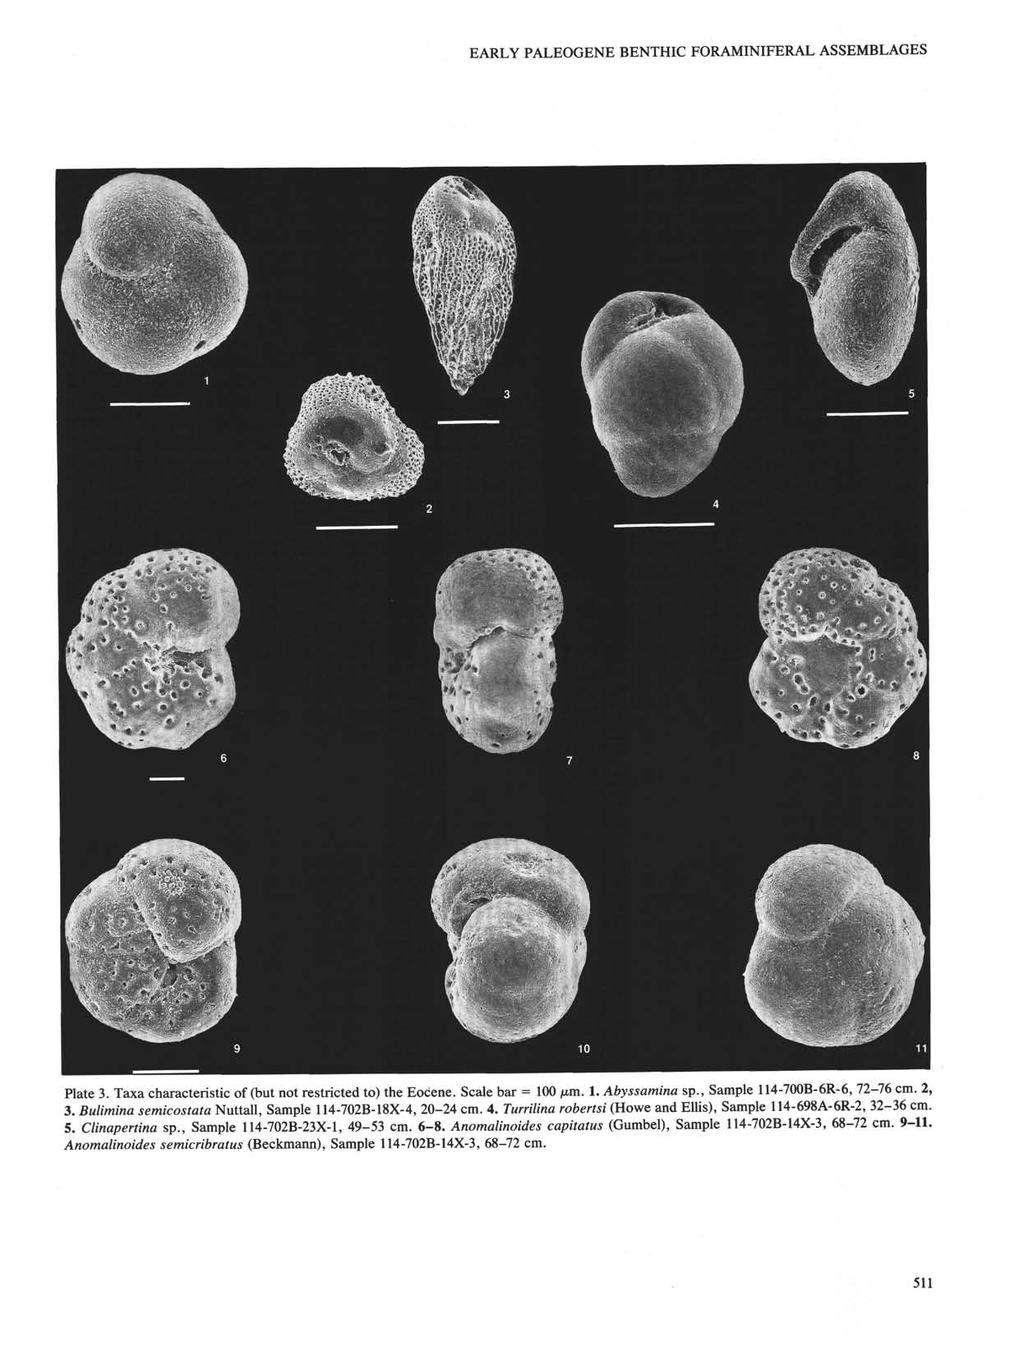 EARLY PALEOGENE BENTHIC FORAMINIFERAL ASSEMBLAGES Plate 3. Taxa characteristic of (but not restricted to) the Eocene. Scale bar = 100 µm. 1. Abyssamina sp., Sample 114-700B-6R-6, 72-76 cm. 2, 3.